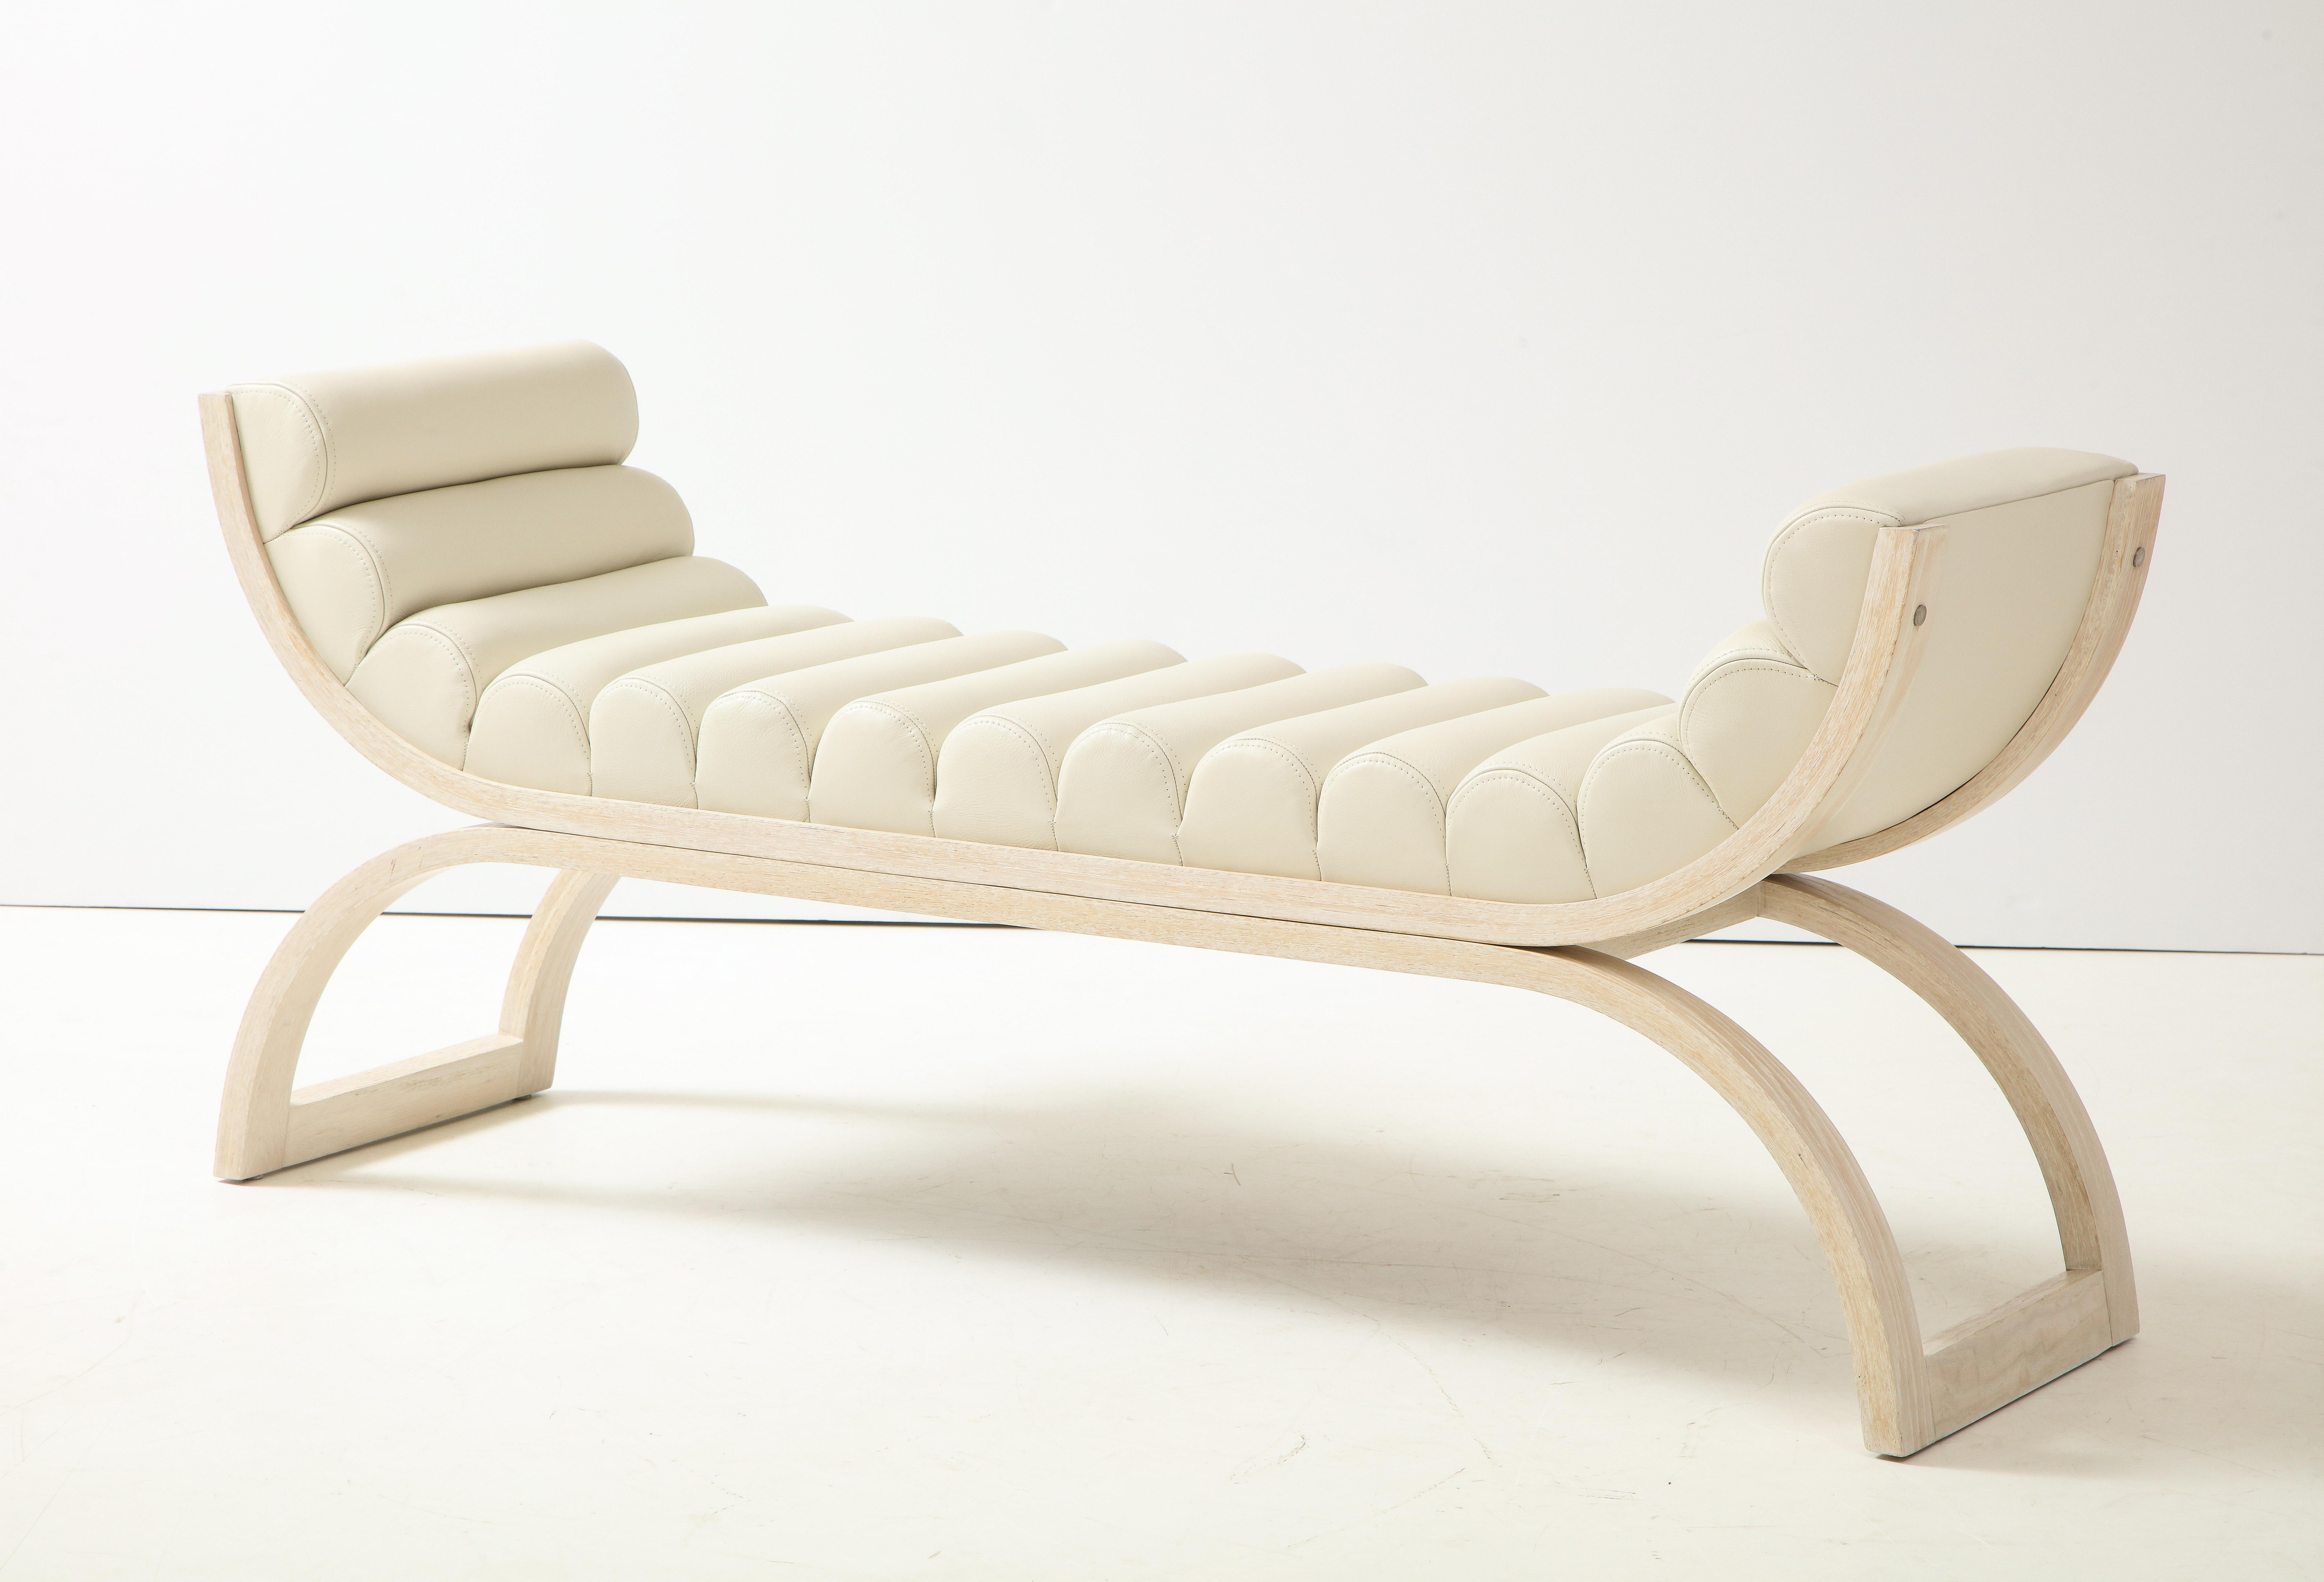 Stunning Jay Spectre Eclipse bench.
The Gracious curved bench has been Newly restored and reupholstered 
in a luxurious Holly Hunt Ivory leather.